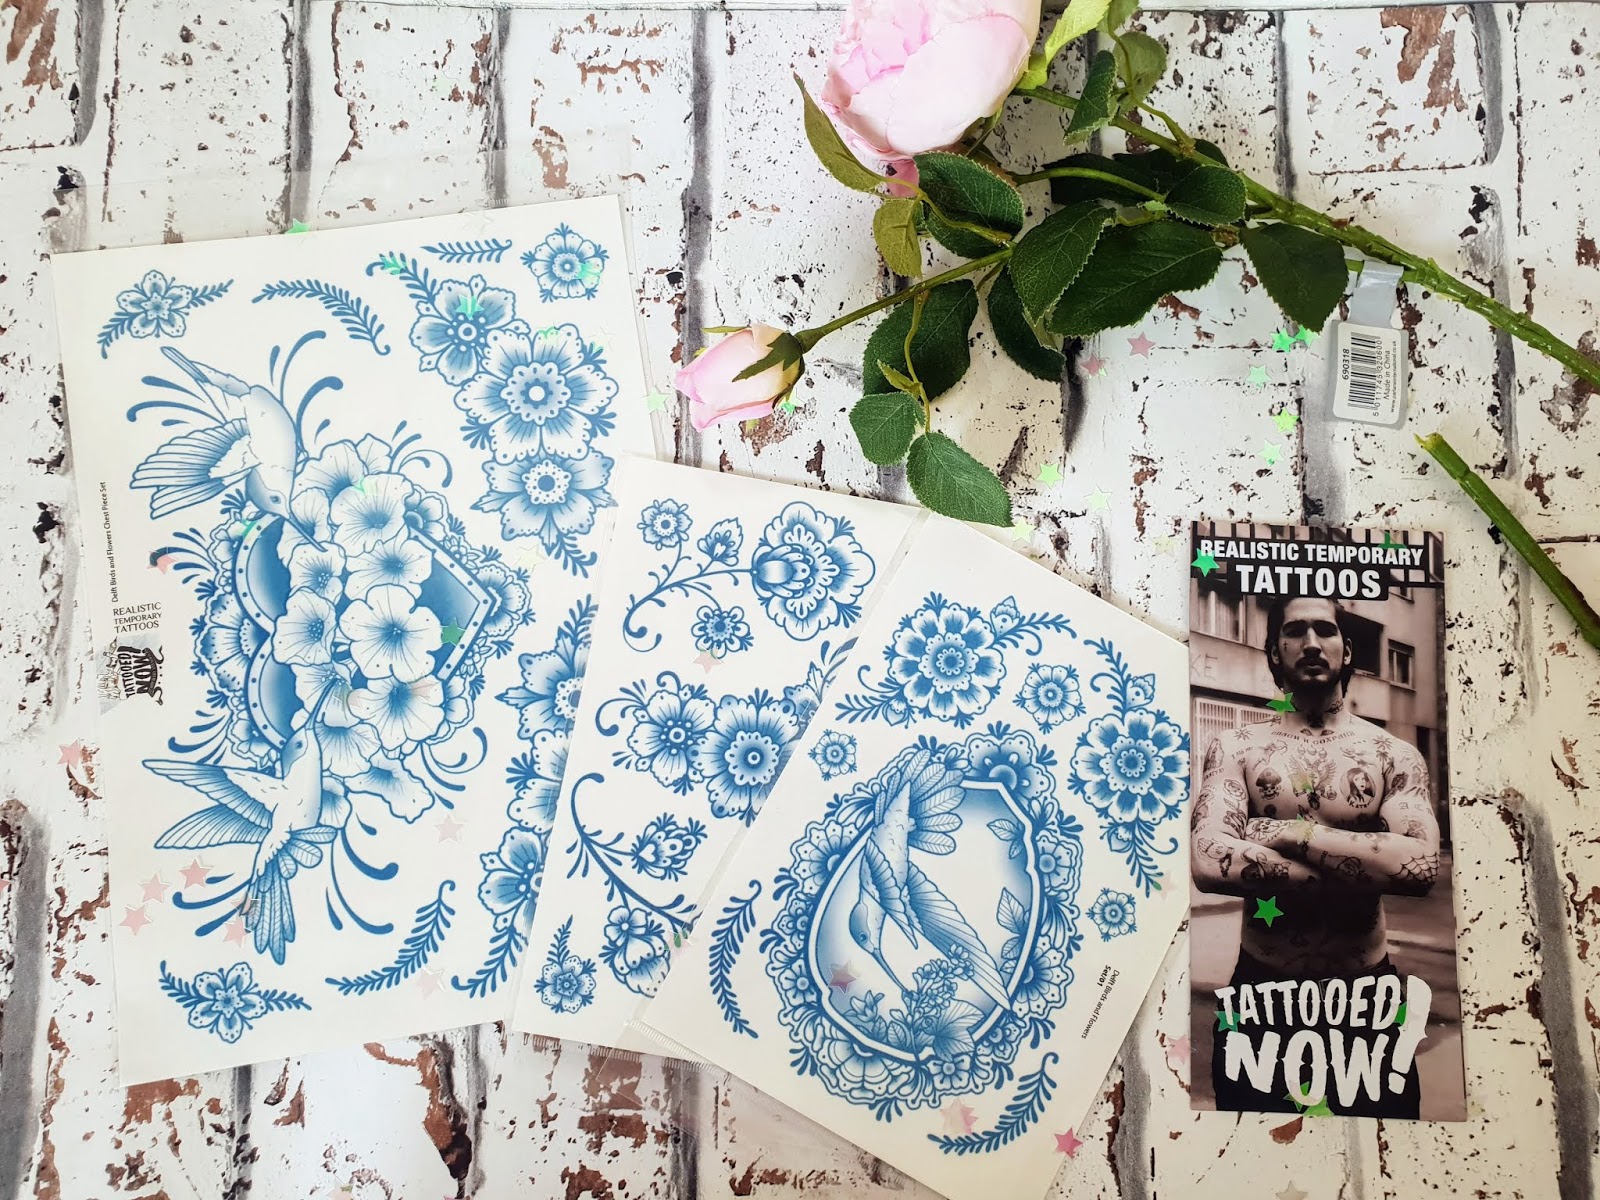 Tattooed Now: Temporary Realistic Tattoos | Review